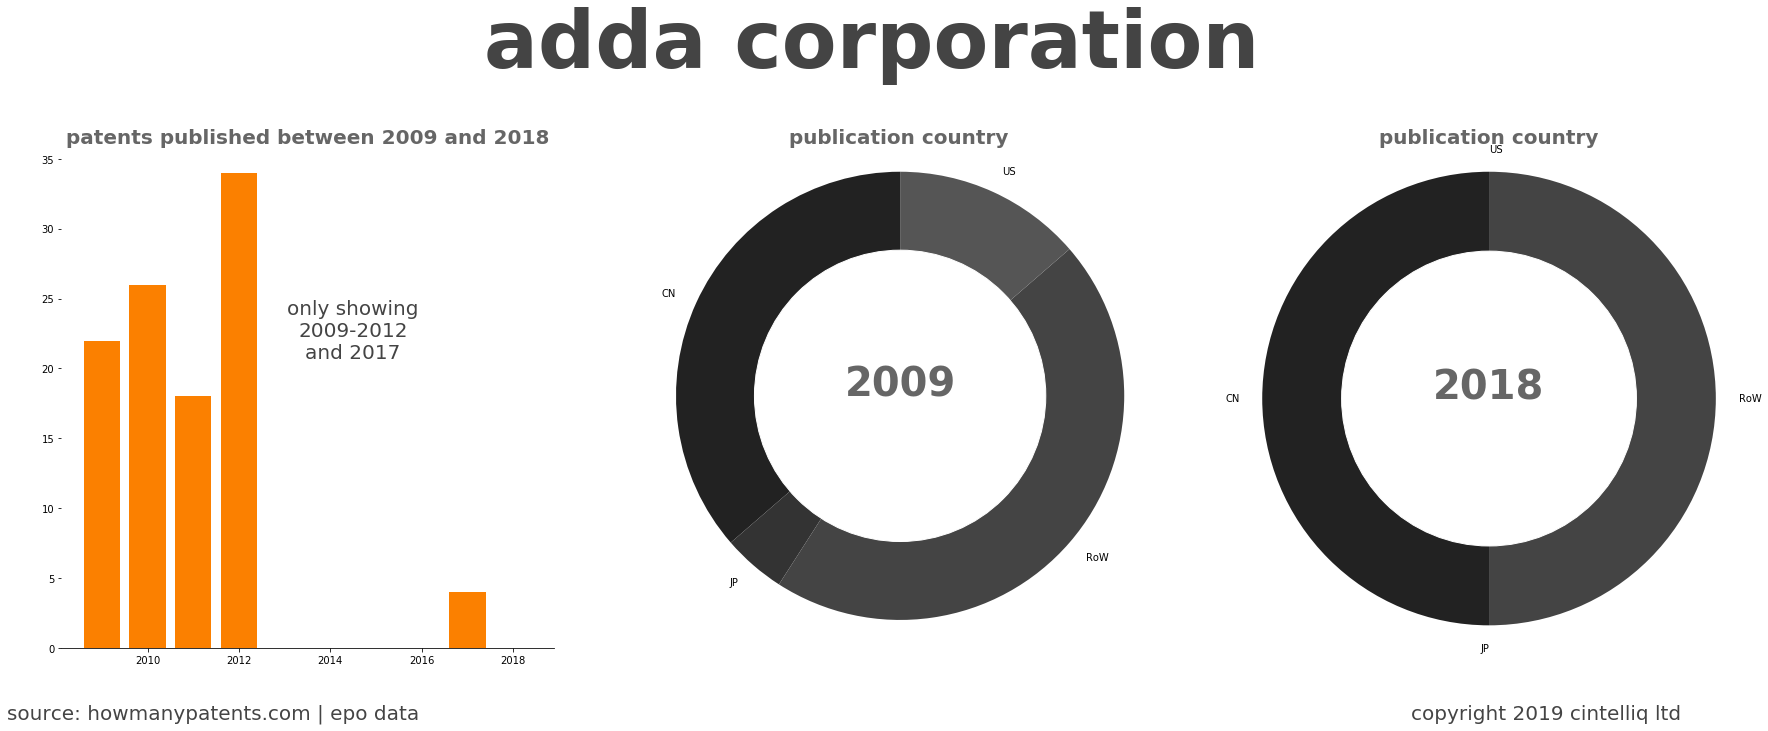 summary of patents for Adda Corporation